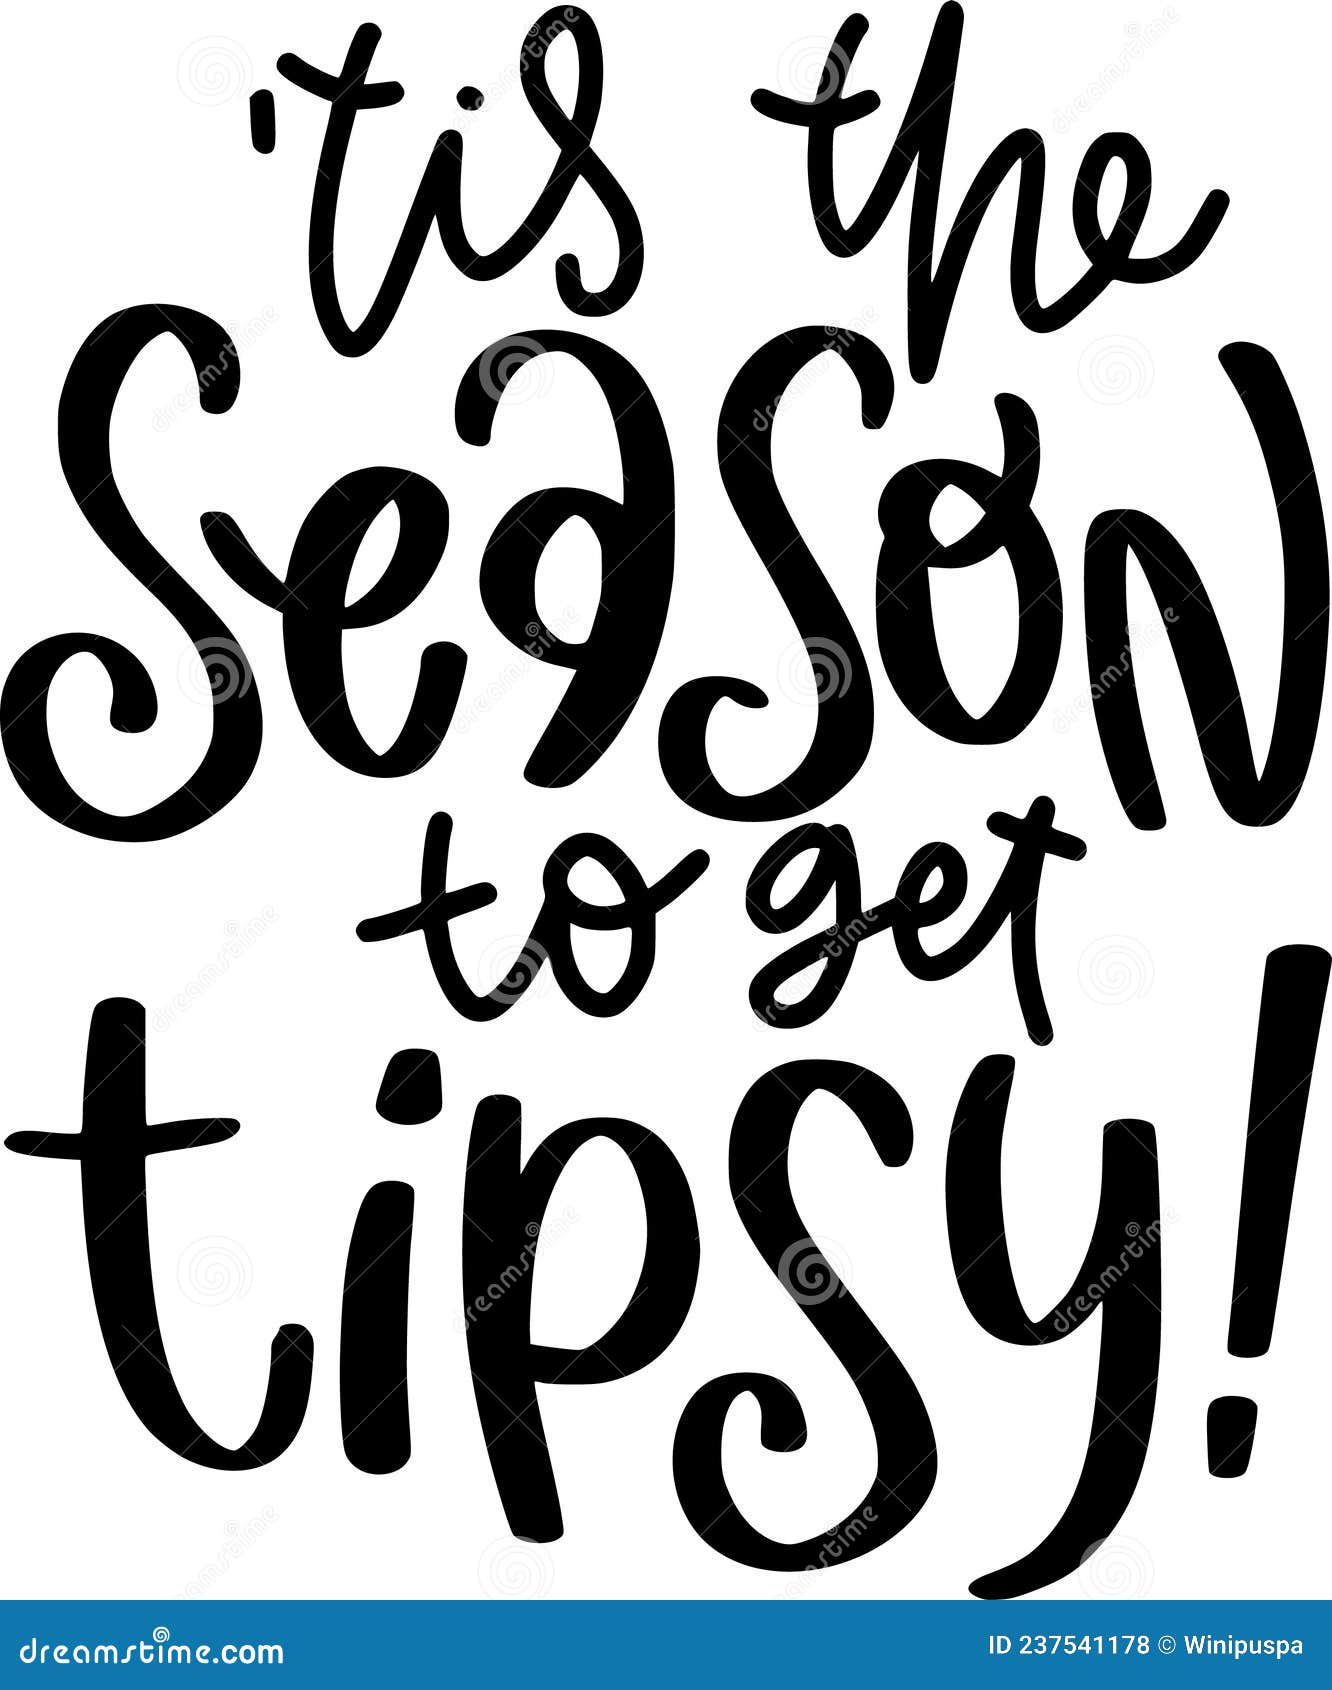 tis the season to get tipsy quotes, funny christmas lettering quotes